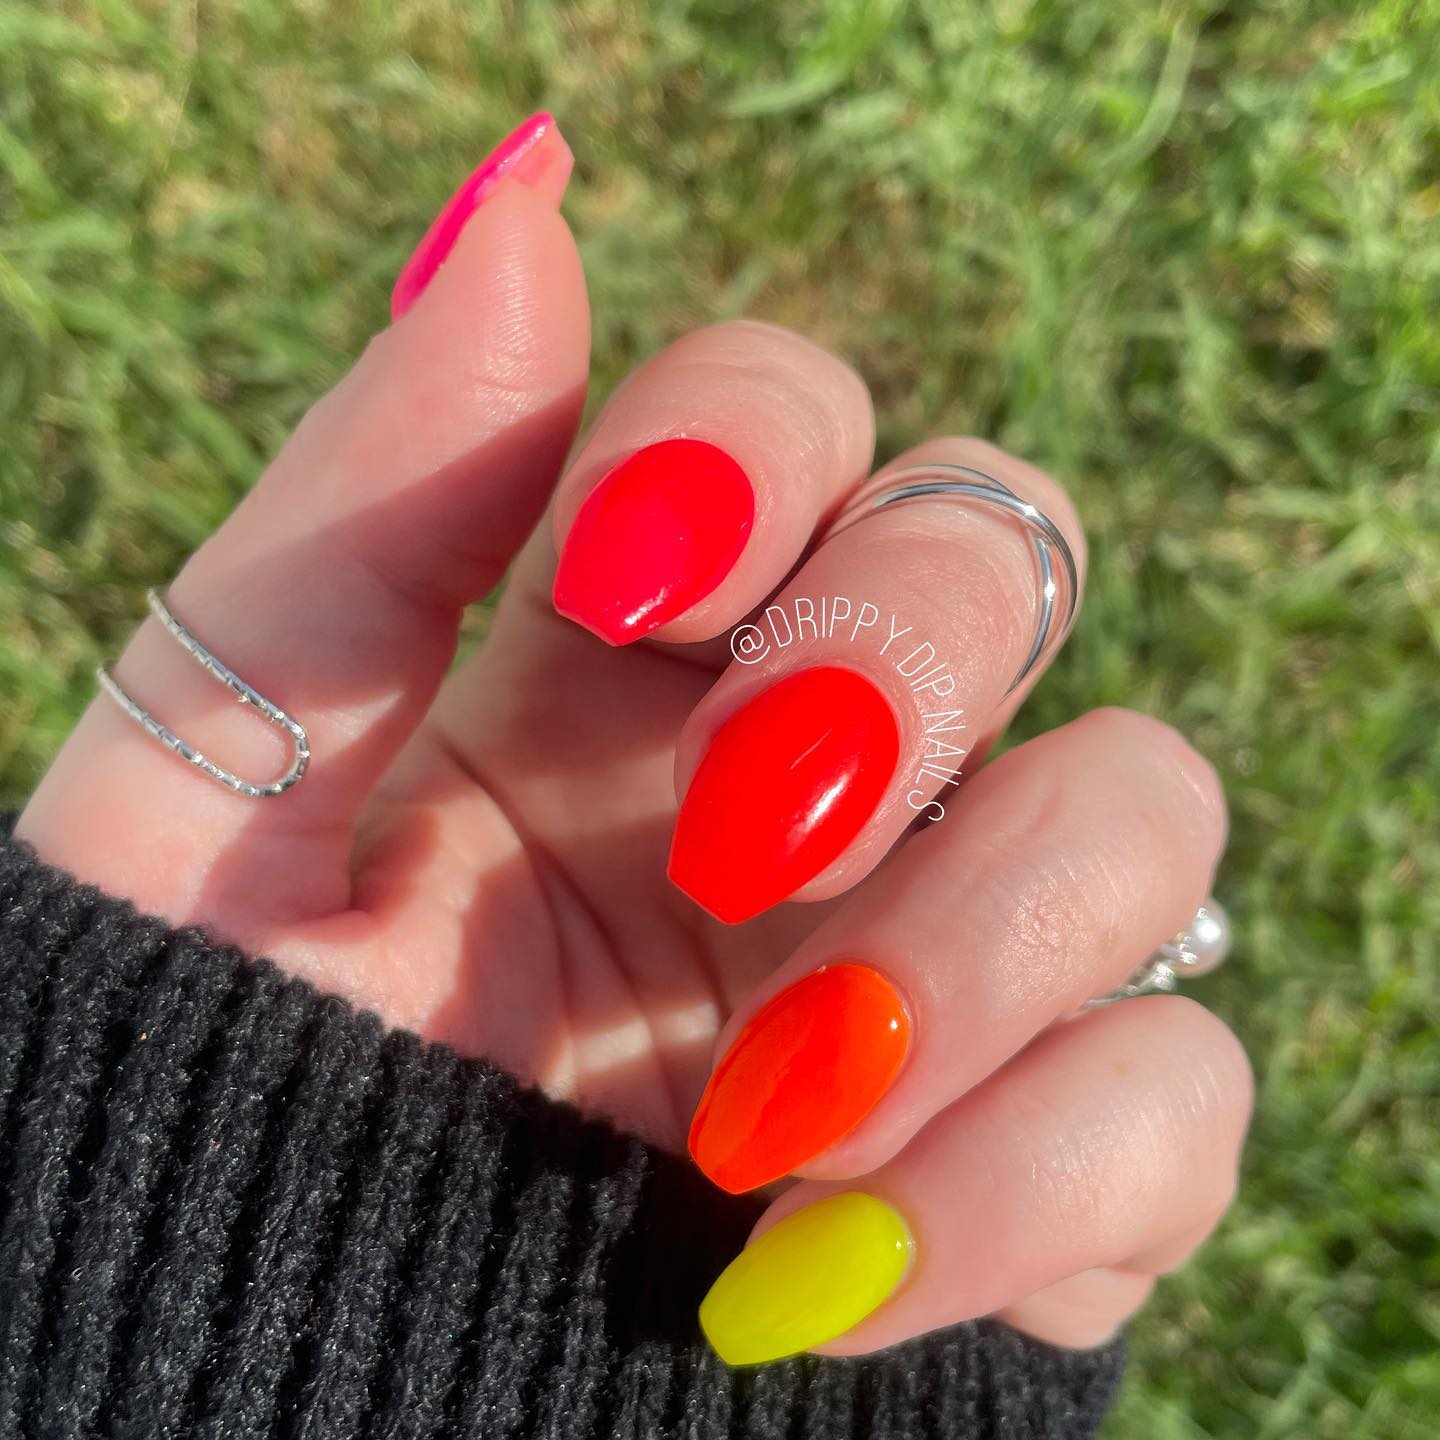 Matching some of neon colors is a nice way to have fun with your nails. You should try the color palette above.